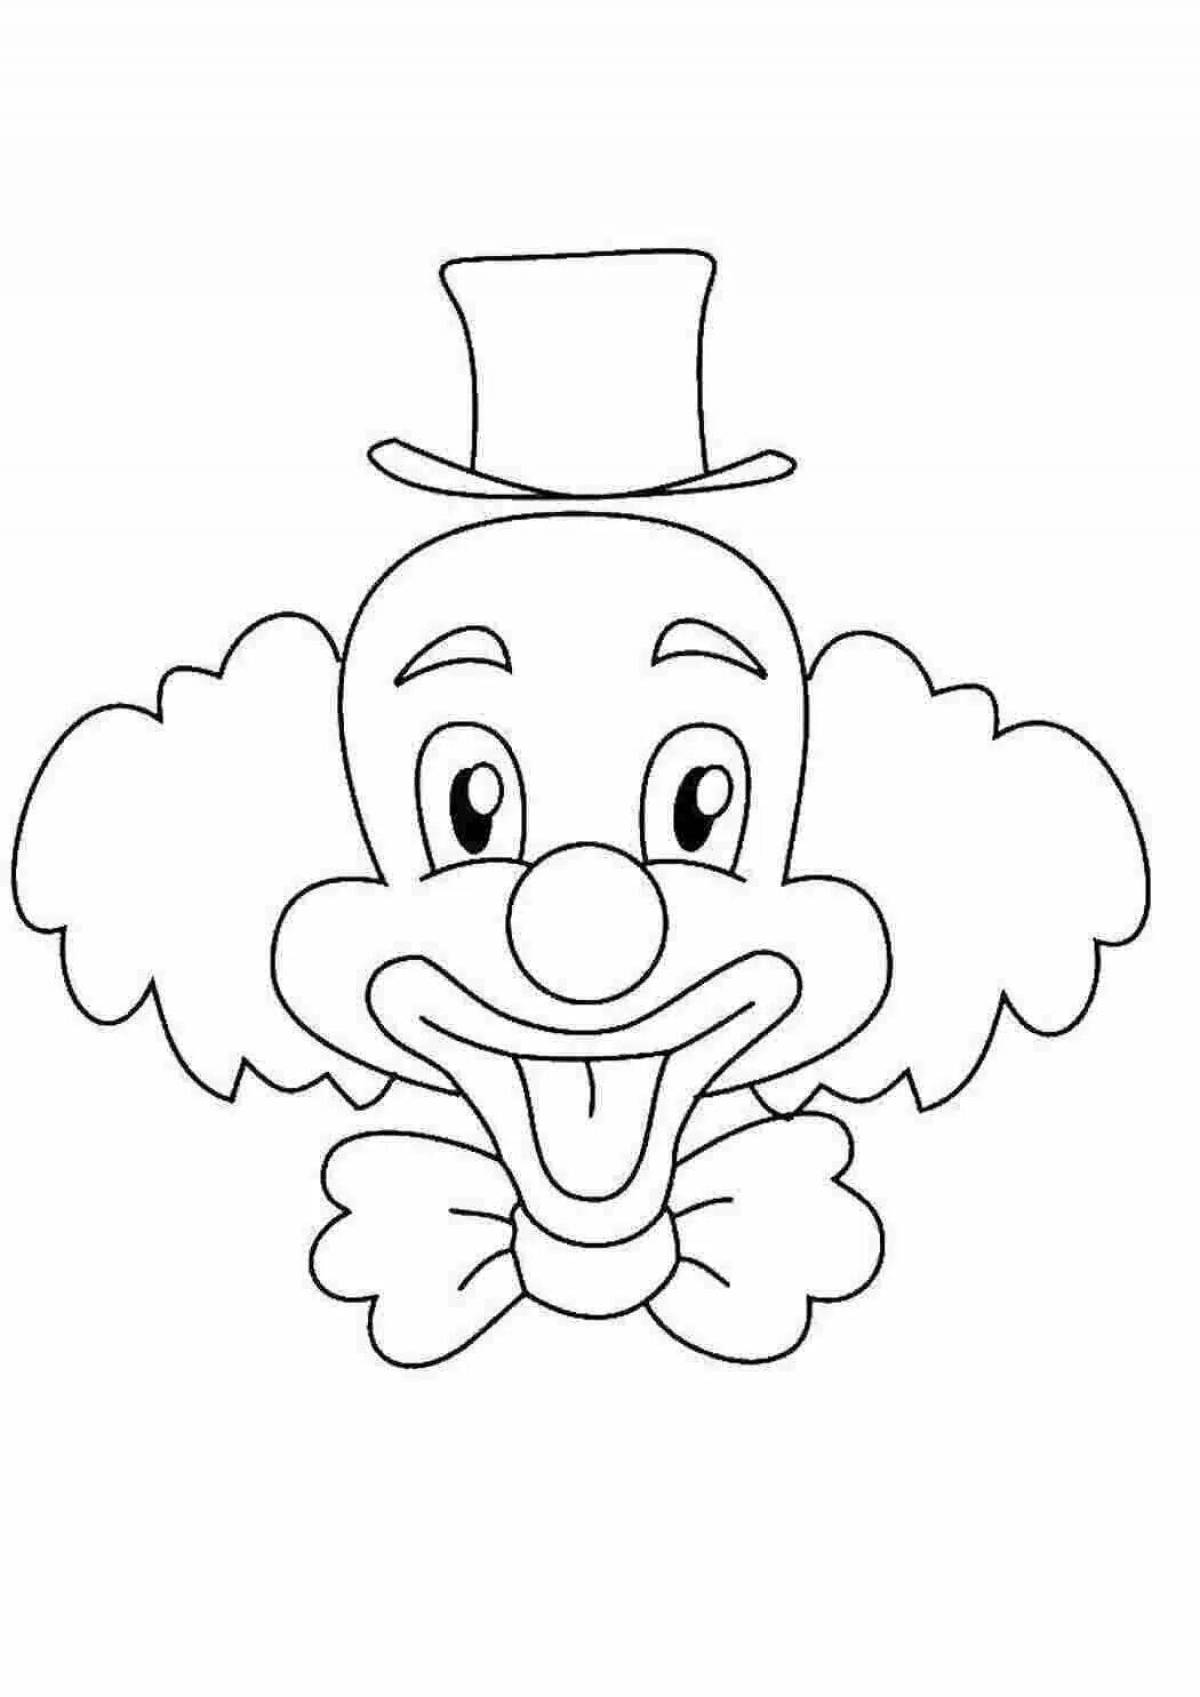 Great clown face coloring page for kids